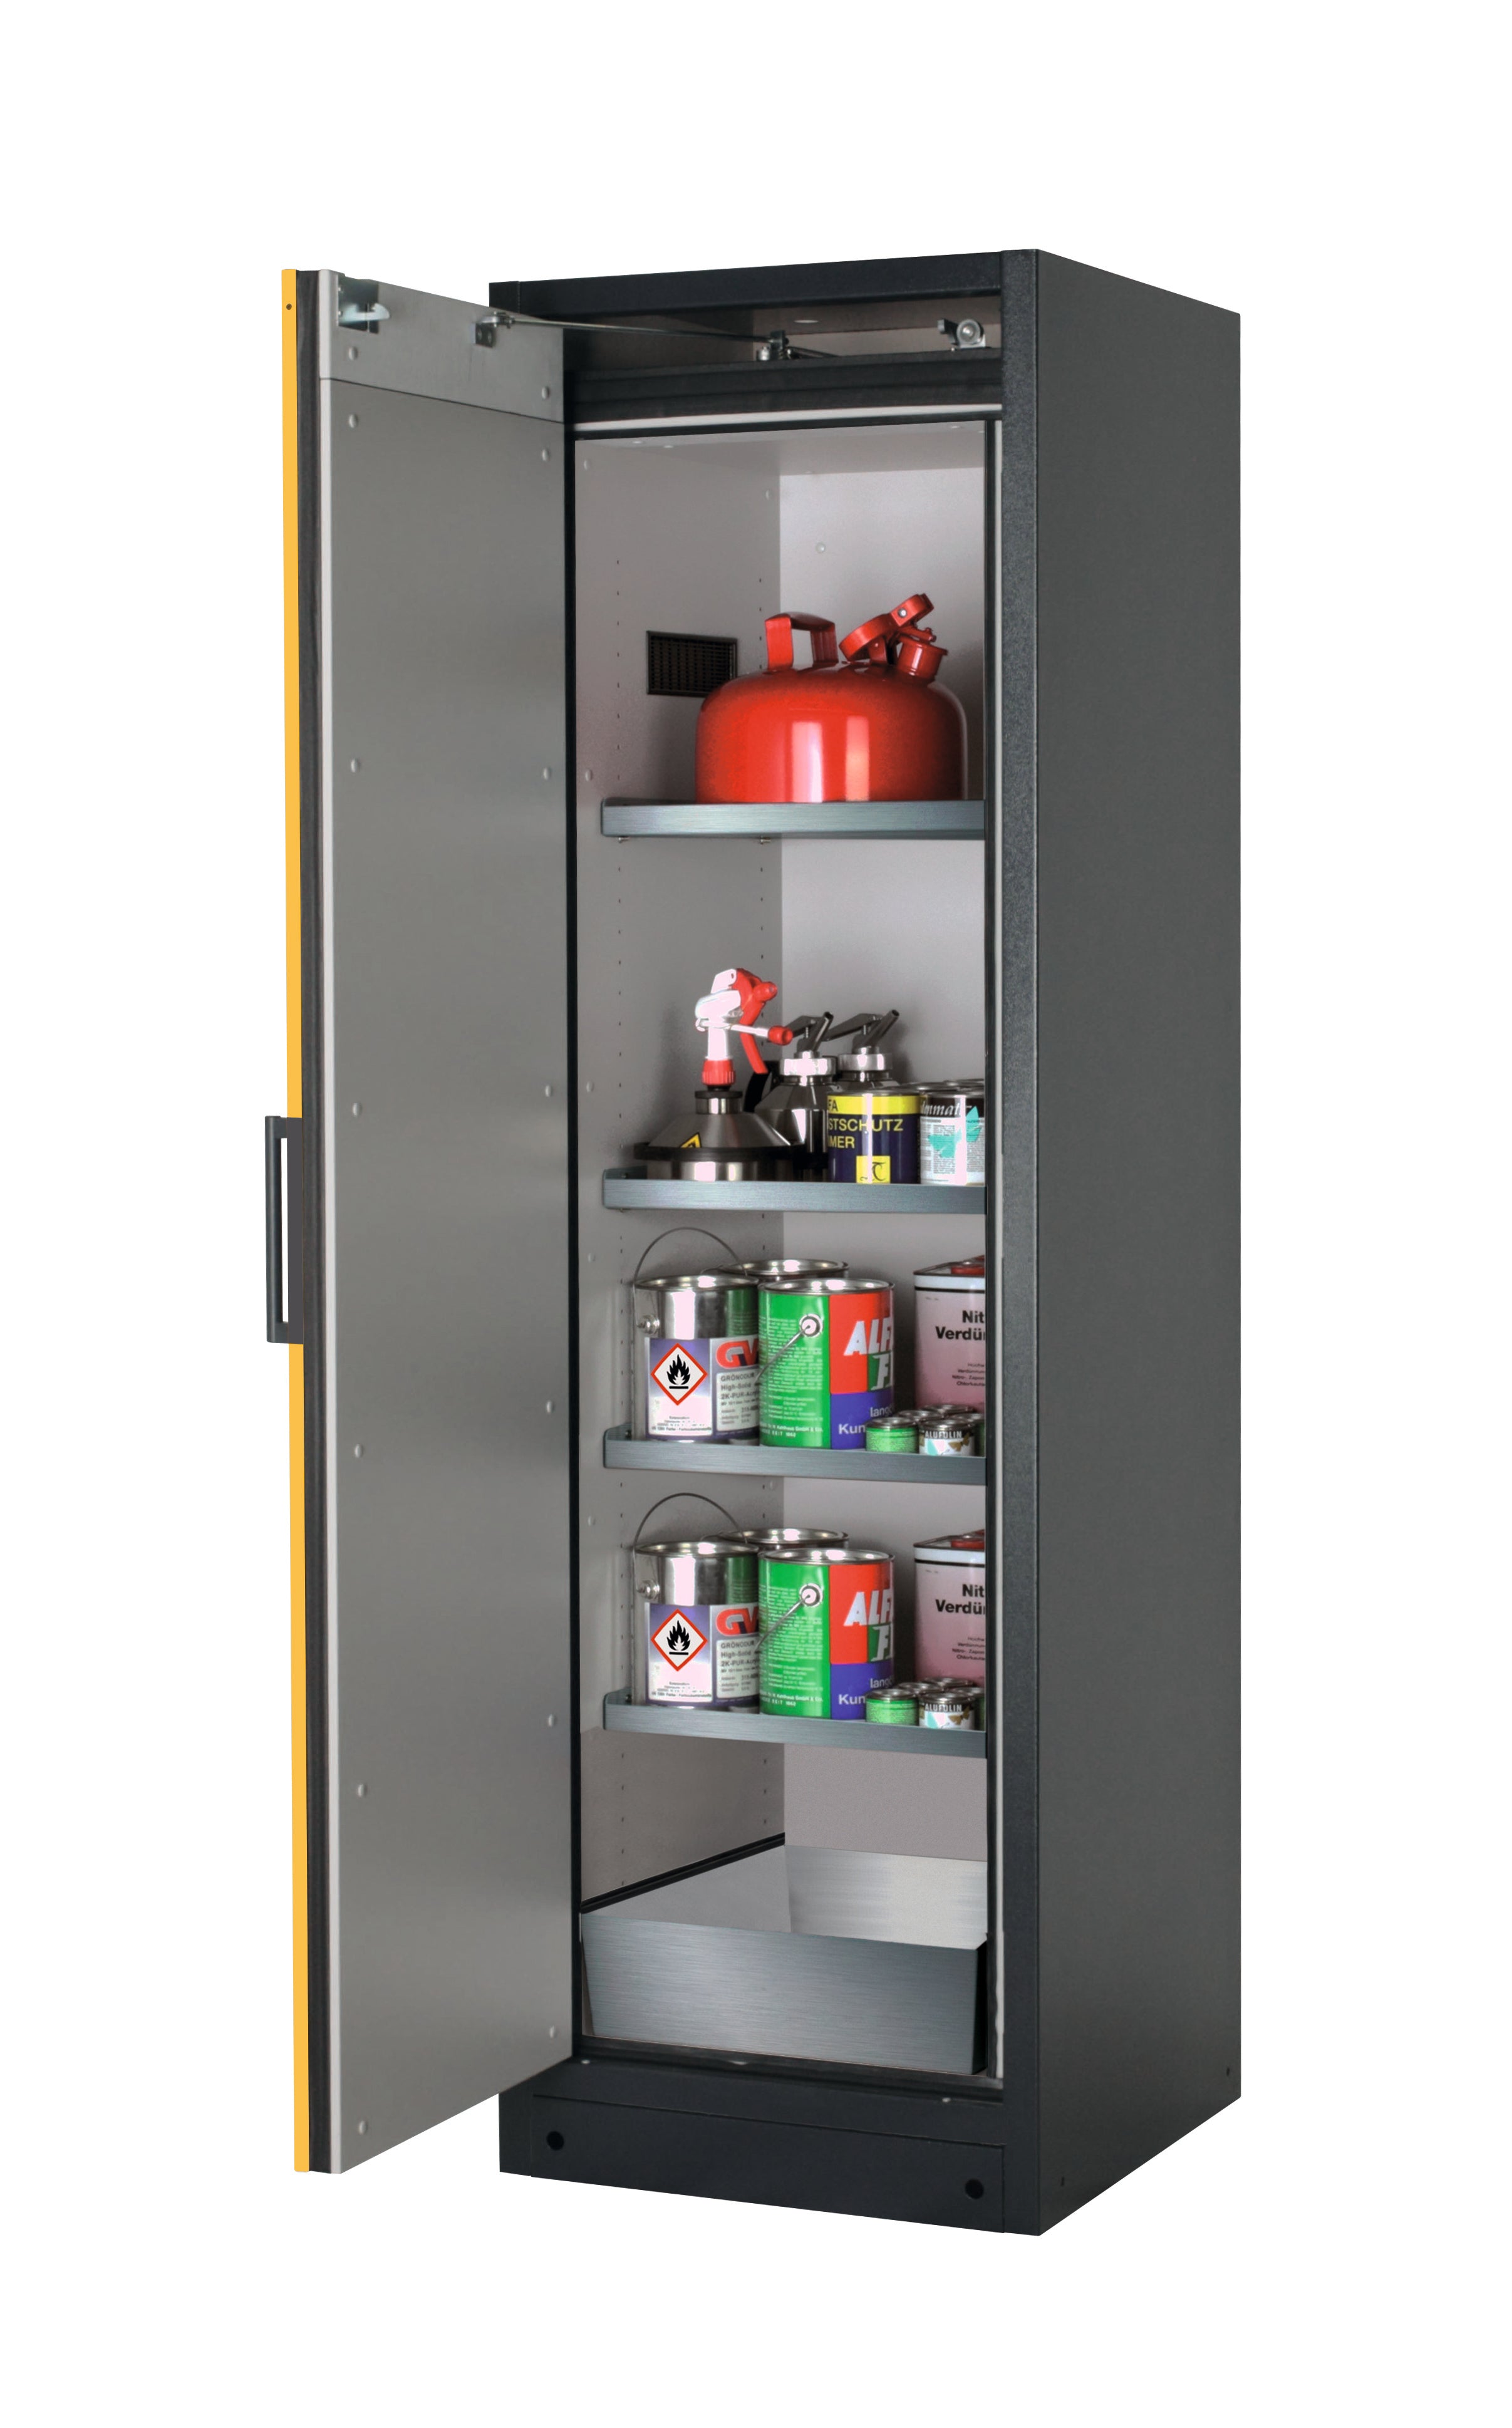 Type 90 safety storage cabinet Q-PEGASUS-90 model Q90.195.060.WDAC in warning yellow RAL 1004 with 4x shelf standard (stainless steel 1.4301),